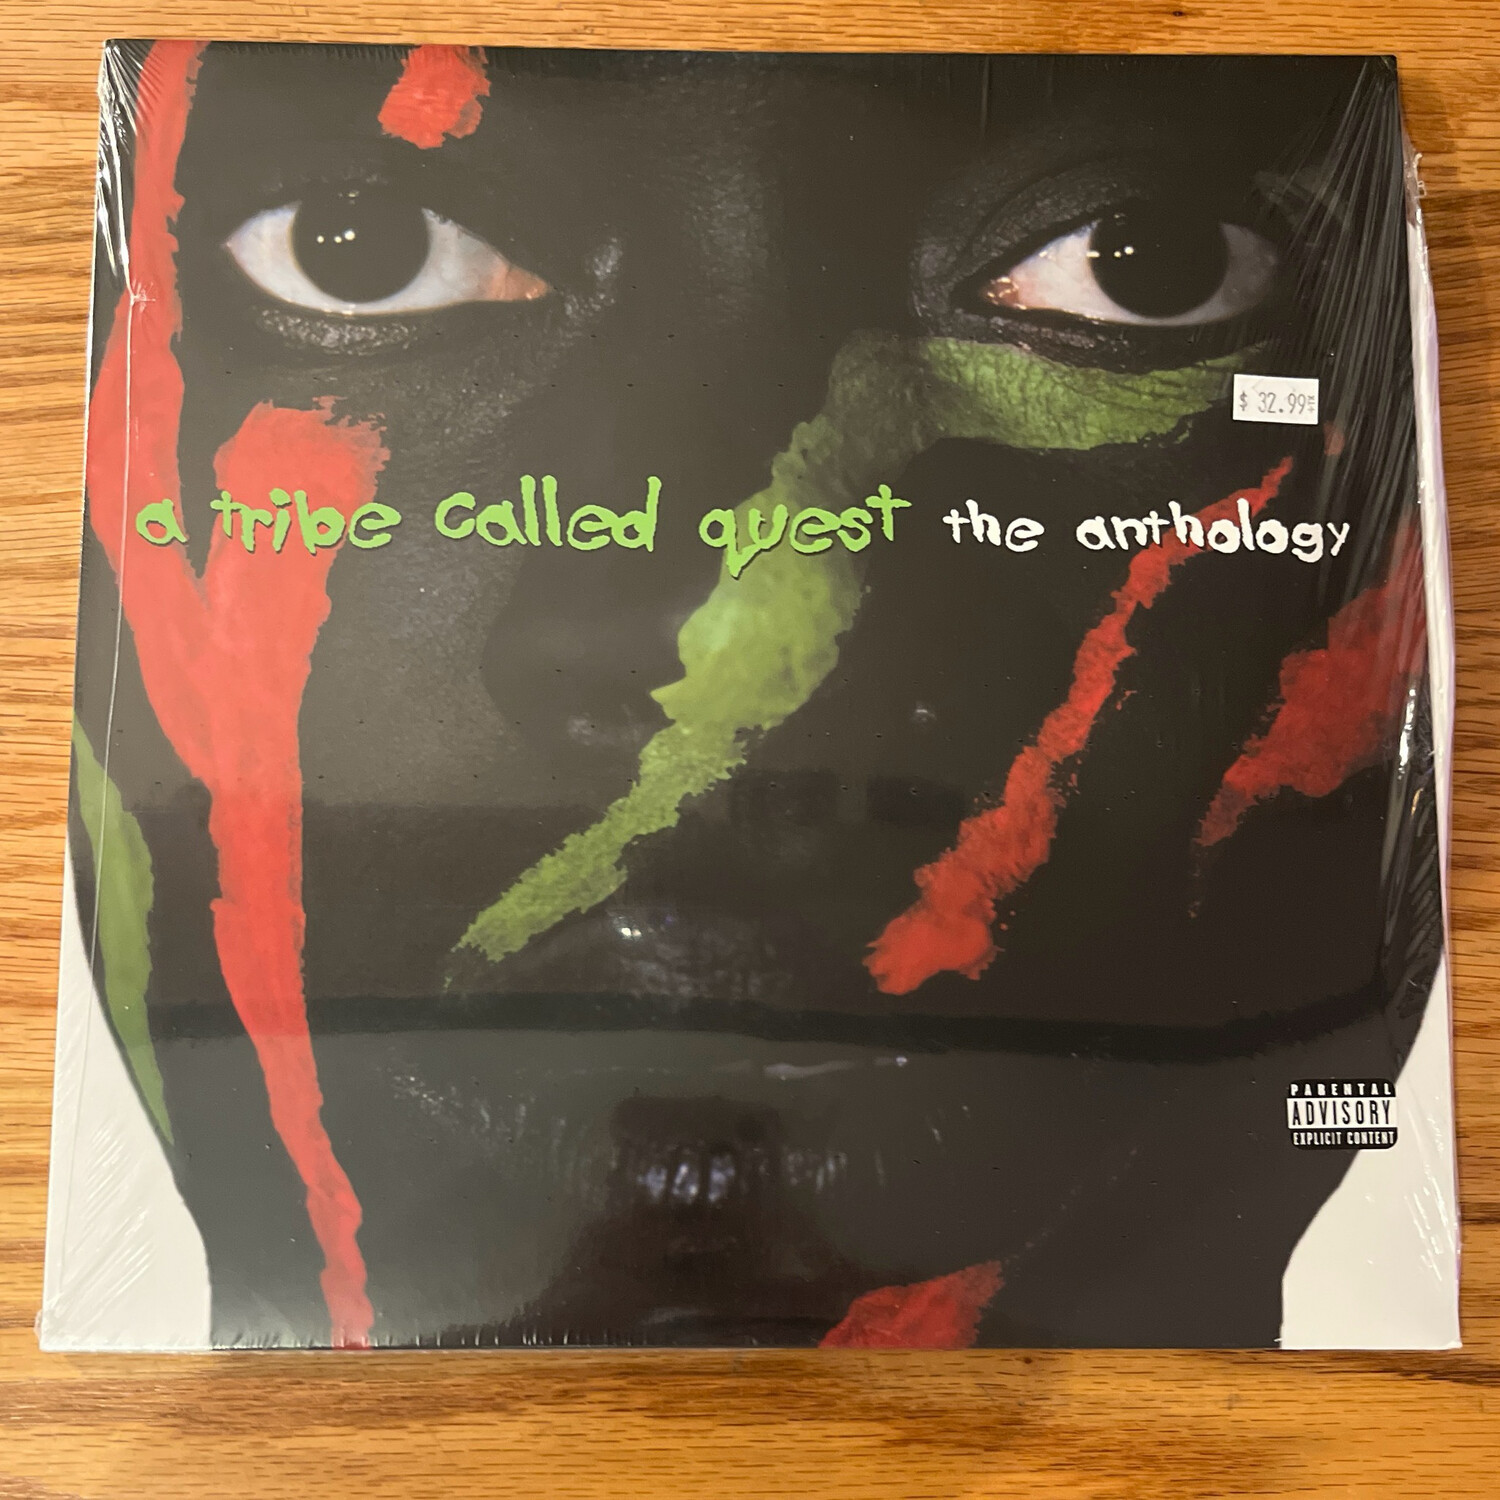 A Tribe Called Quest “The Anthology”